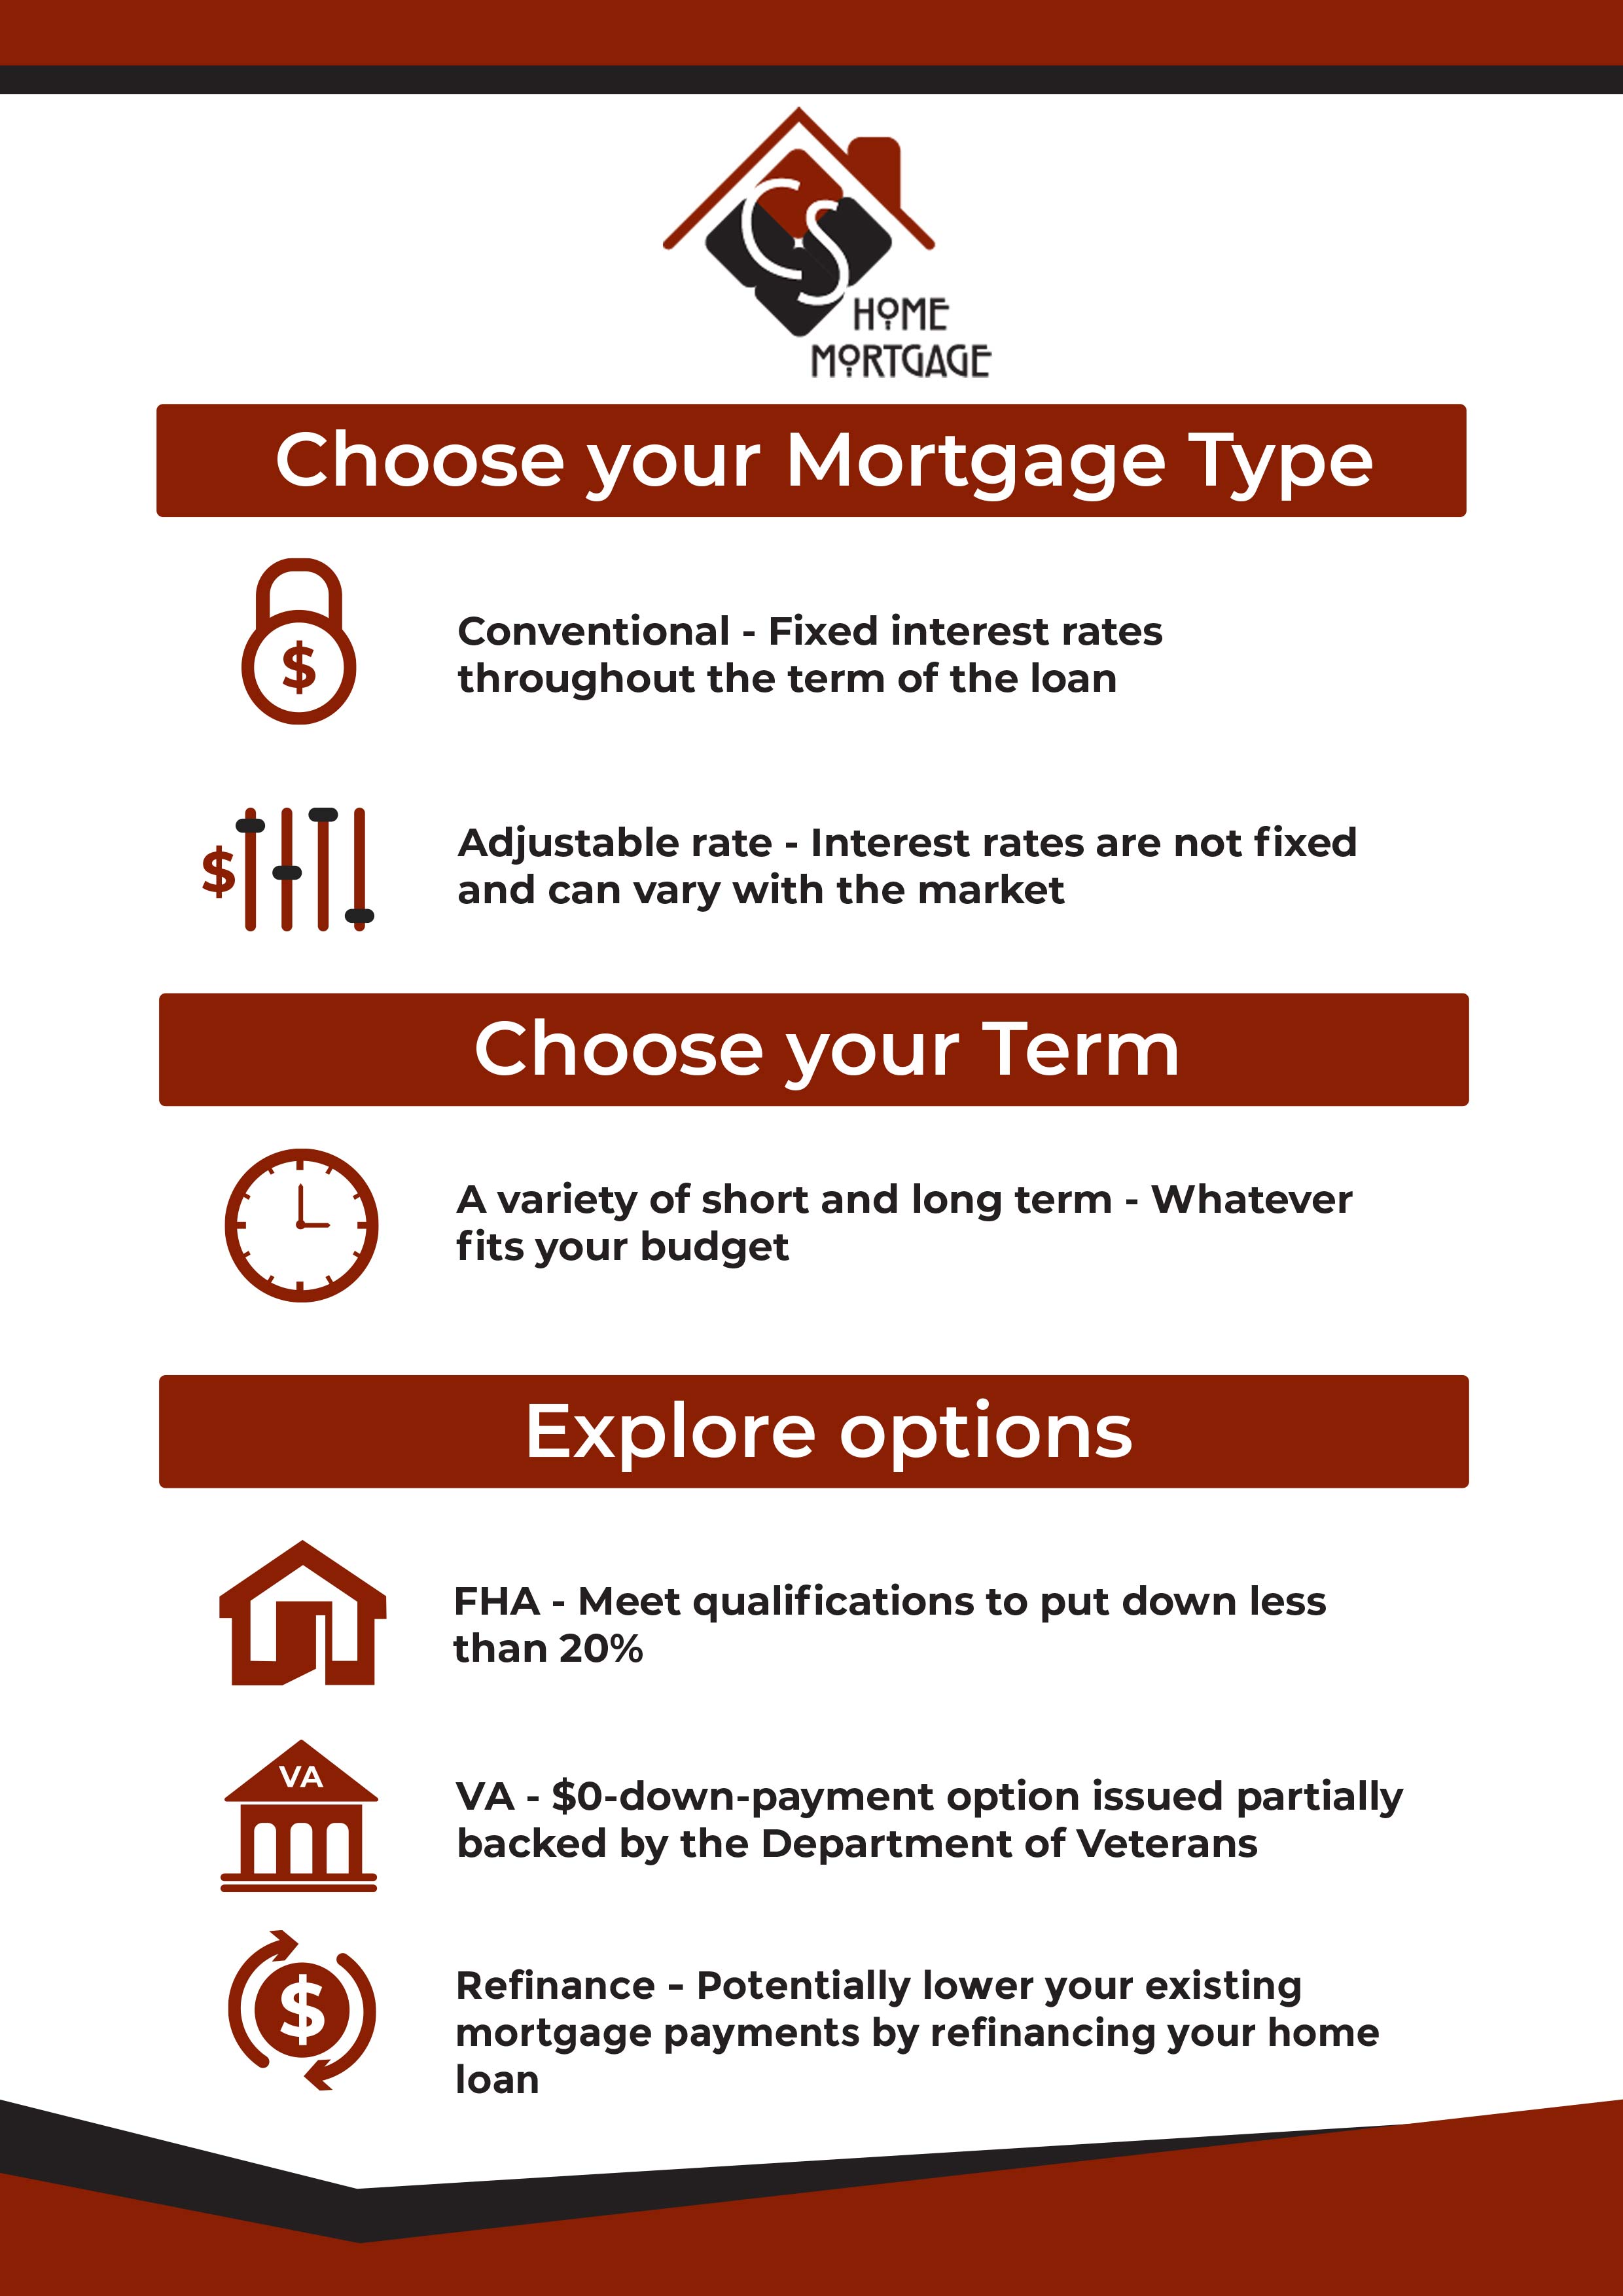 Choose your Mortgage Type: Conventional - Fixed interest rates throughout term of the loan; Adjustable - interest rates are not fixed and can very with the market. Choose your term: 15, 20 or 30 years, whatever fits your budget. Explore options: FHA - Meet qualifications to put less than 20% down payment, VA - $0 down payment option issued partially backed by the Department of Veterans, Refinance - Potentially lower your existing mortgage payments by refinancing your home loan